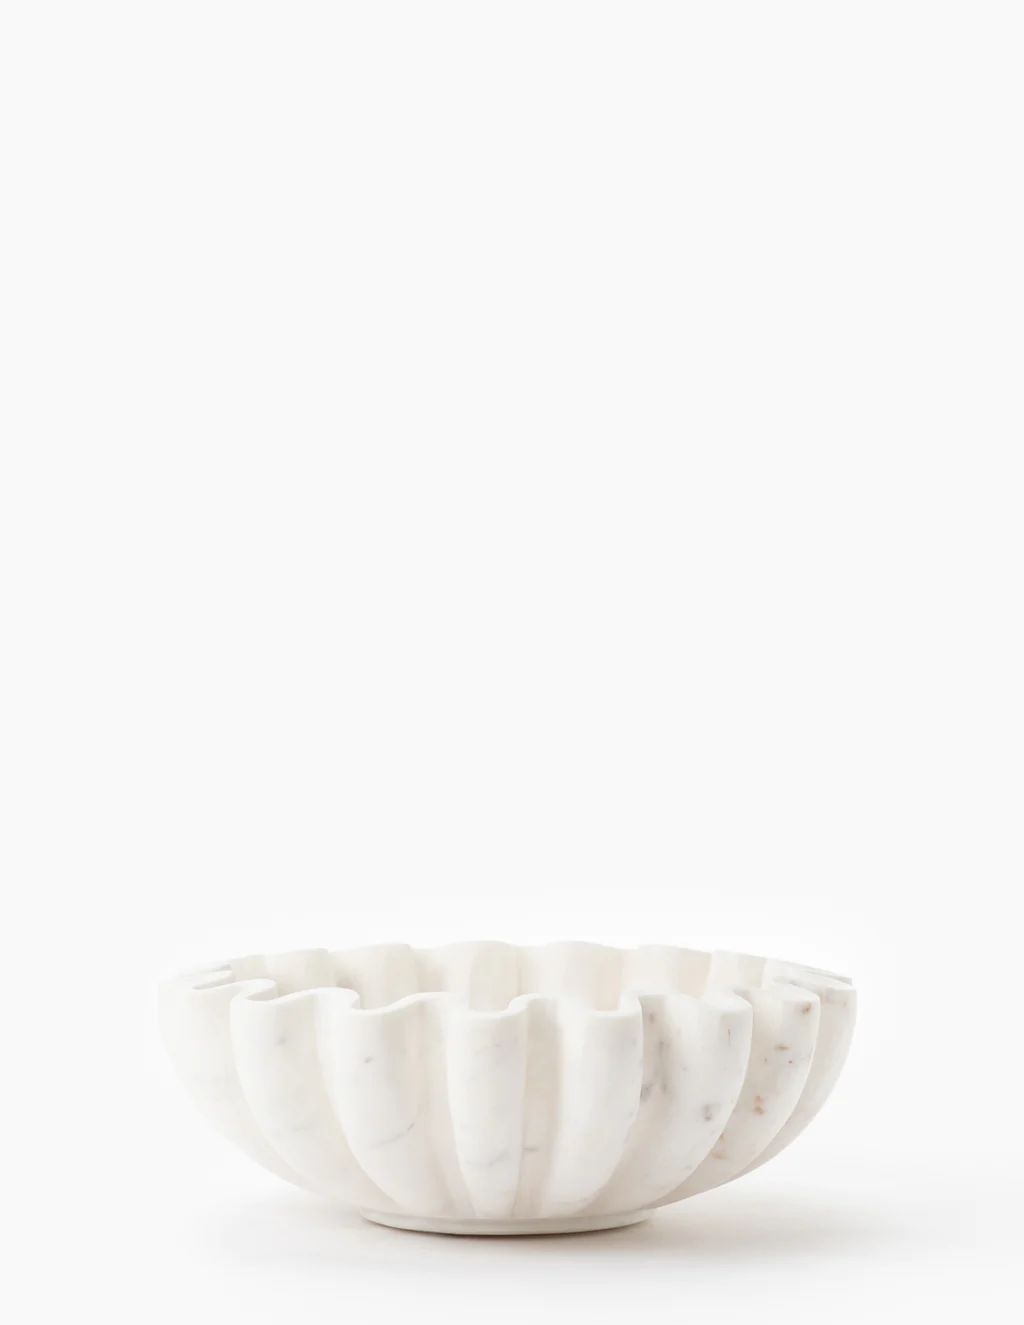 Fluted Marble Bowl | McGee & Co.